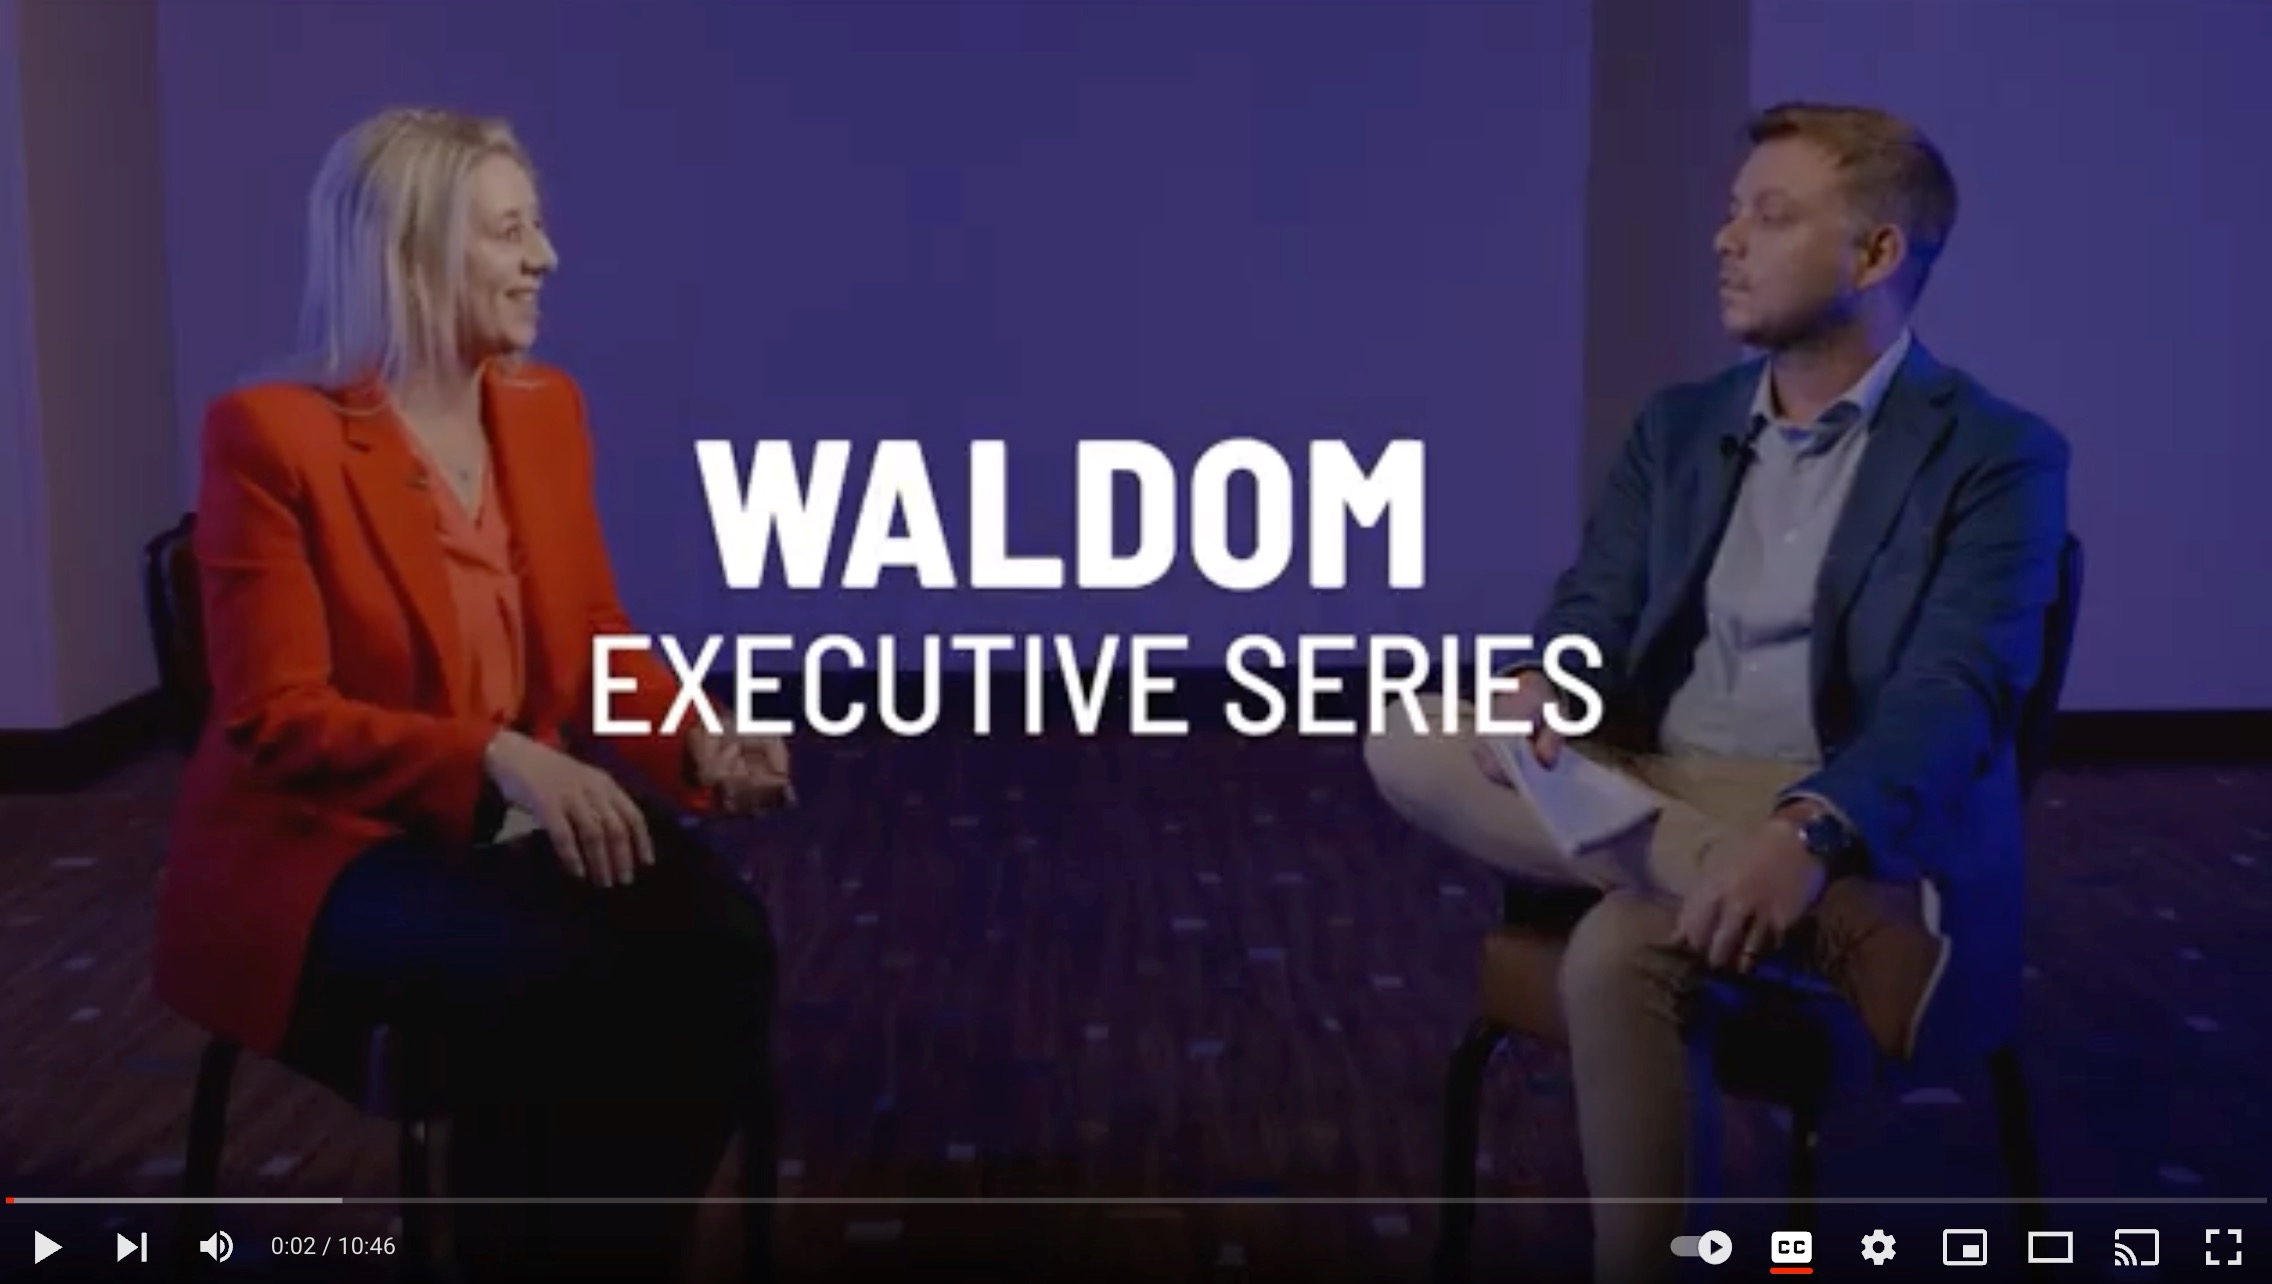 Waldom Executive Interview with Sannah Vinding, Founder of the Leadership in Manufacturing Podcast